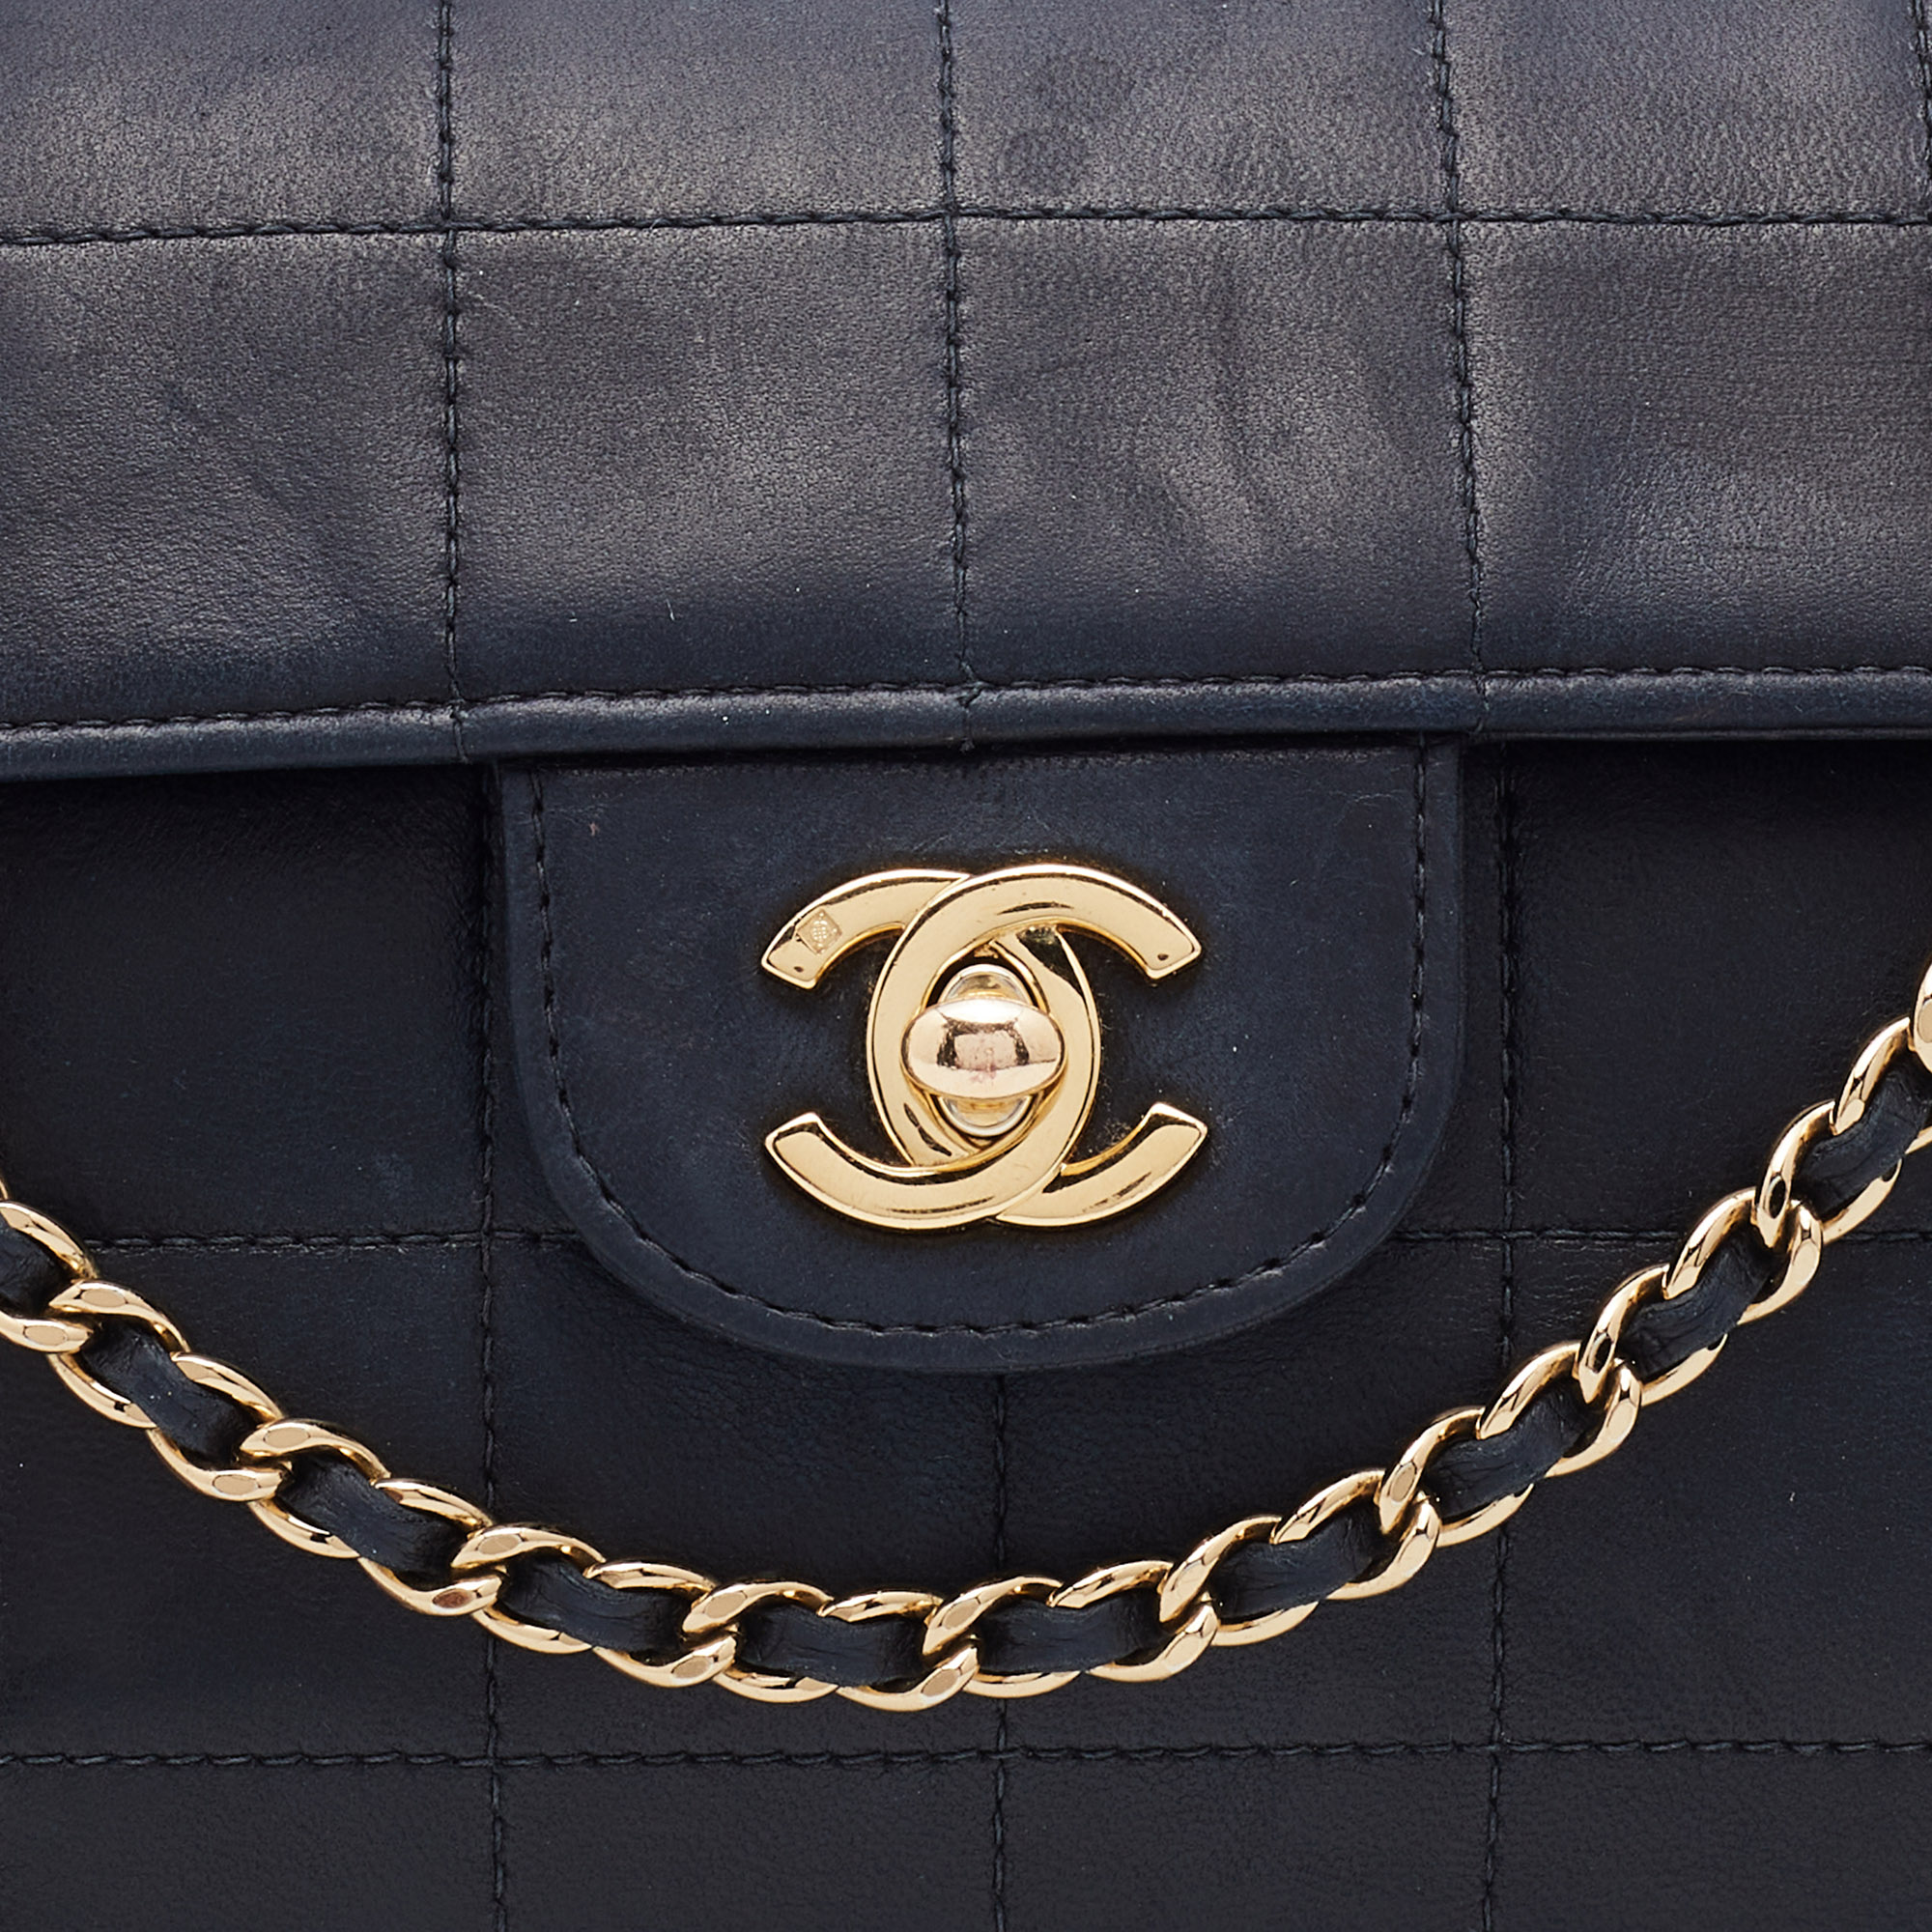 Chanel Black Chocolate Bar Quilted Leather East West Flap Bag